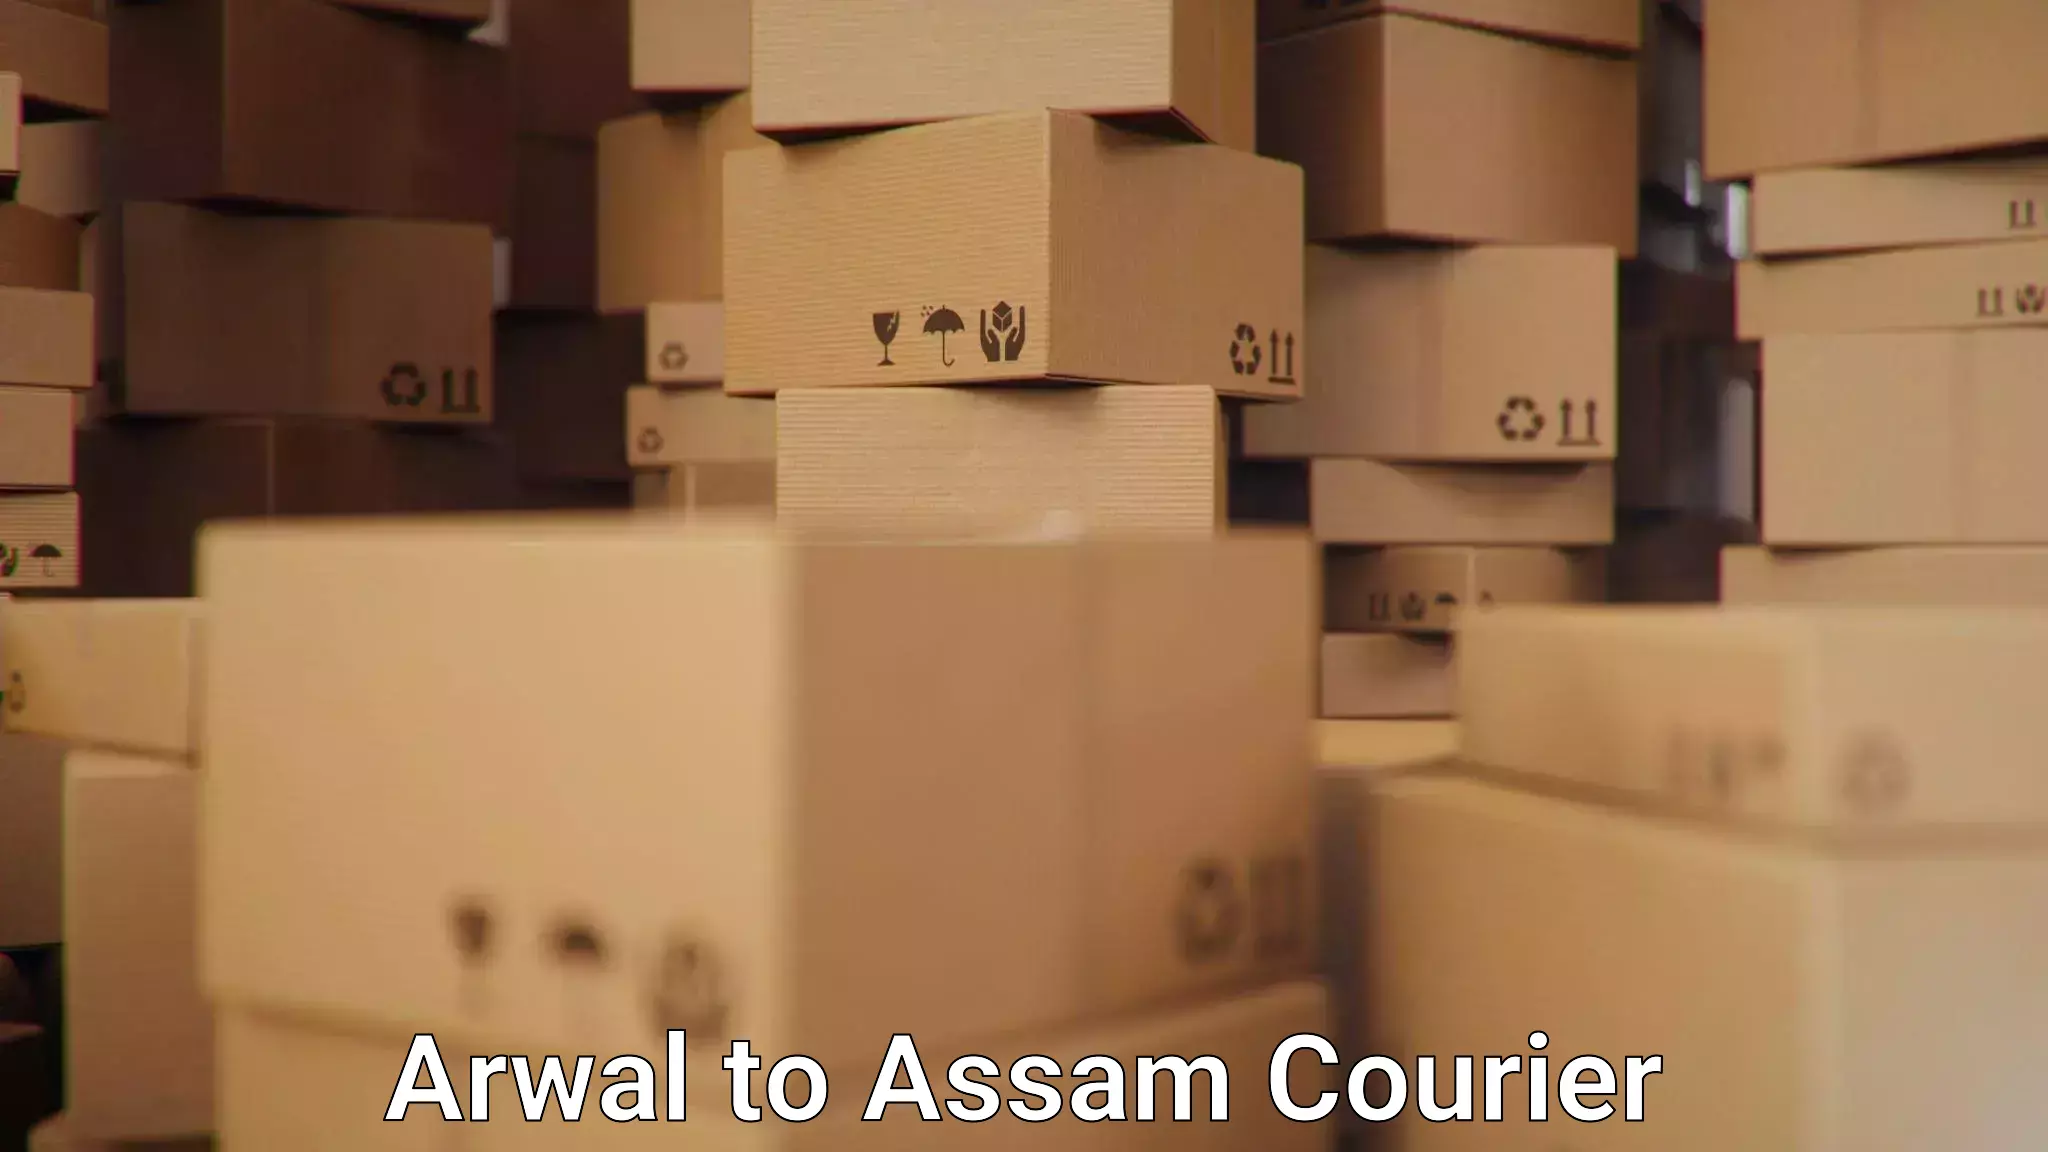 Reliable shipping partners Arwal to Lala Assam